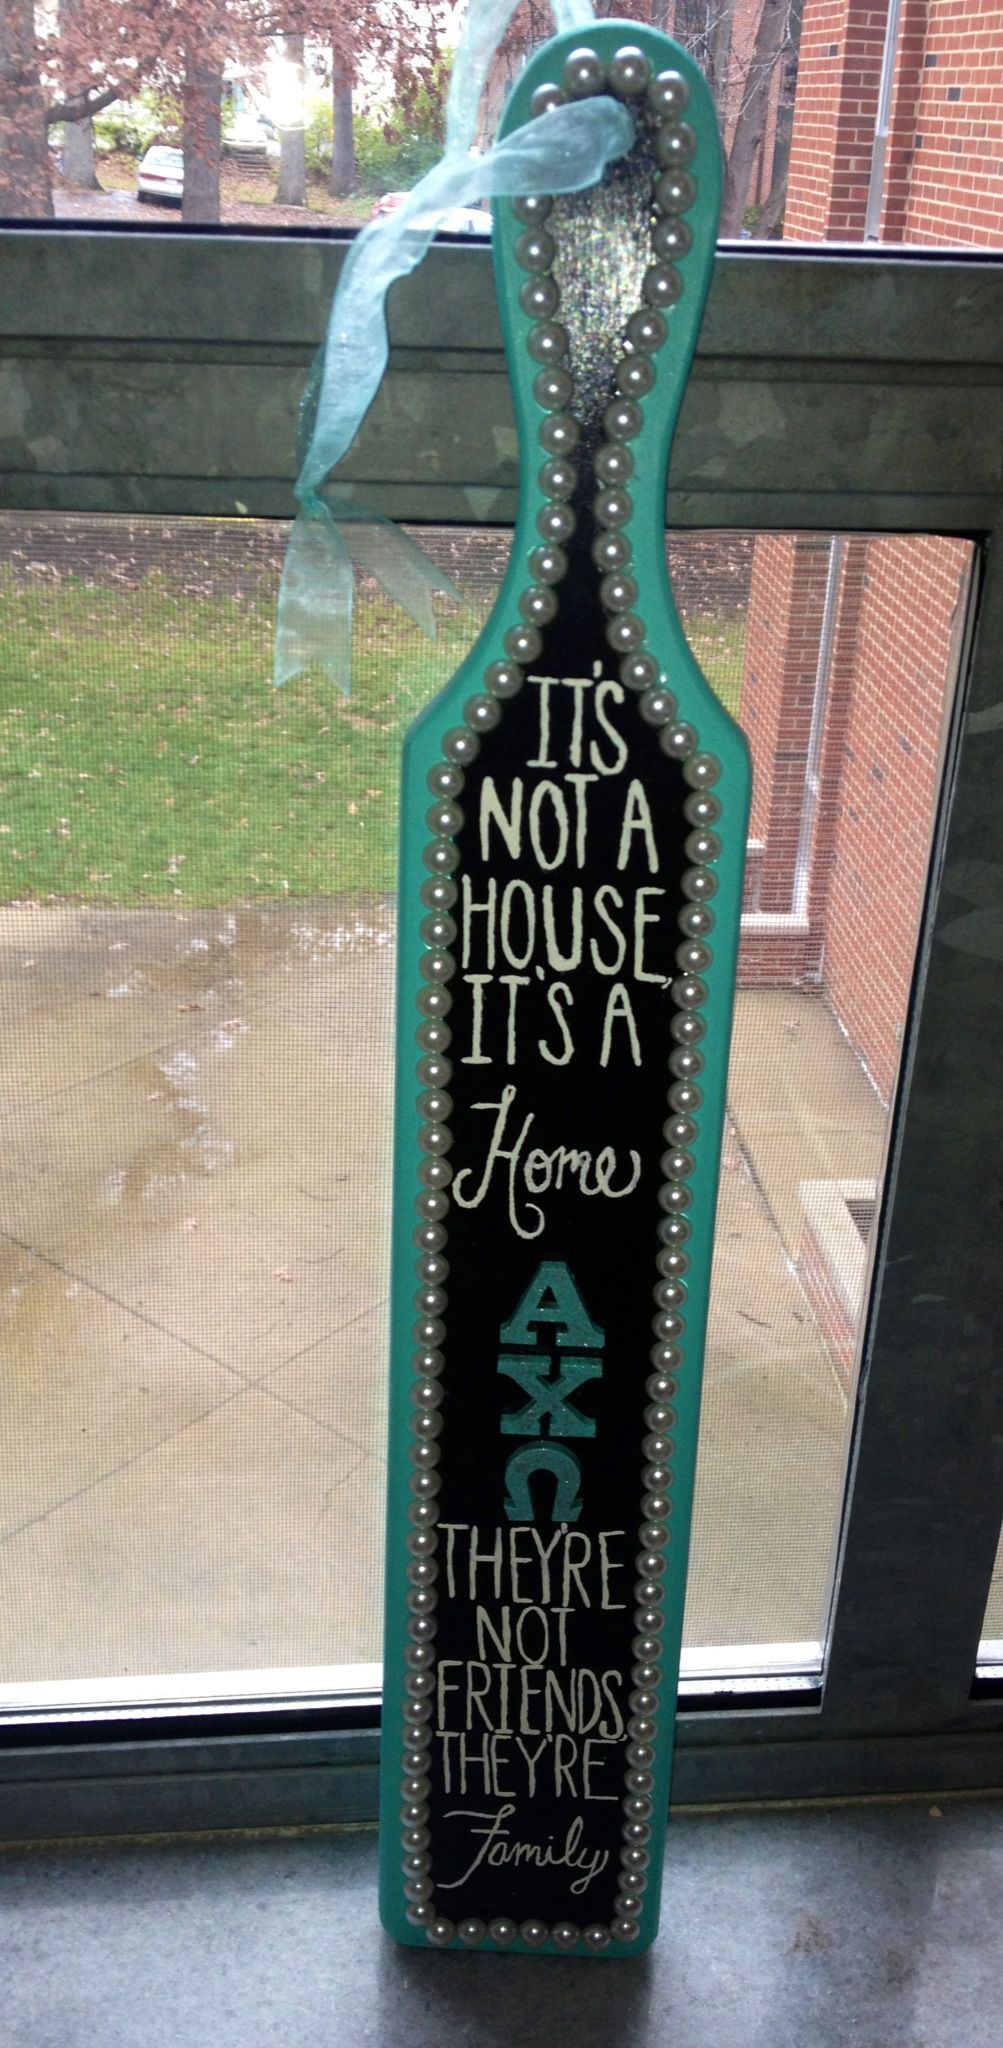 Sorority Paddles | Alpha Chi Omega | AChiO | Its not a house, its a home. Theyre not friends, theyre family. TSM.